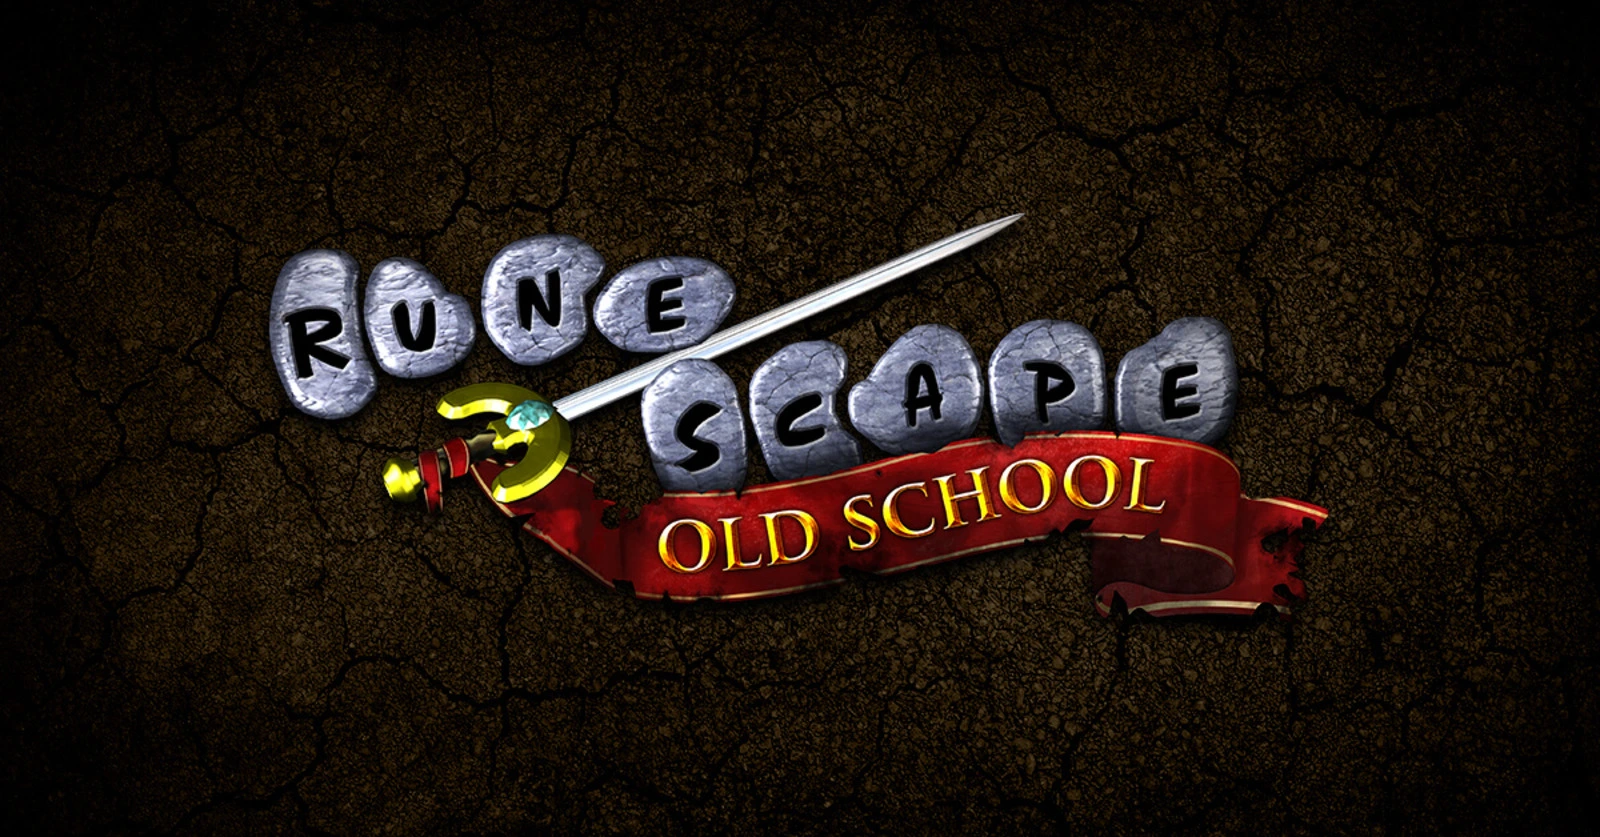 Devs are working on a fix for Old School Runescape Brown & white screen issues